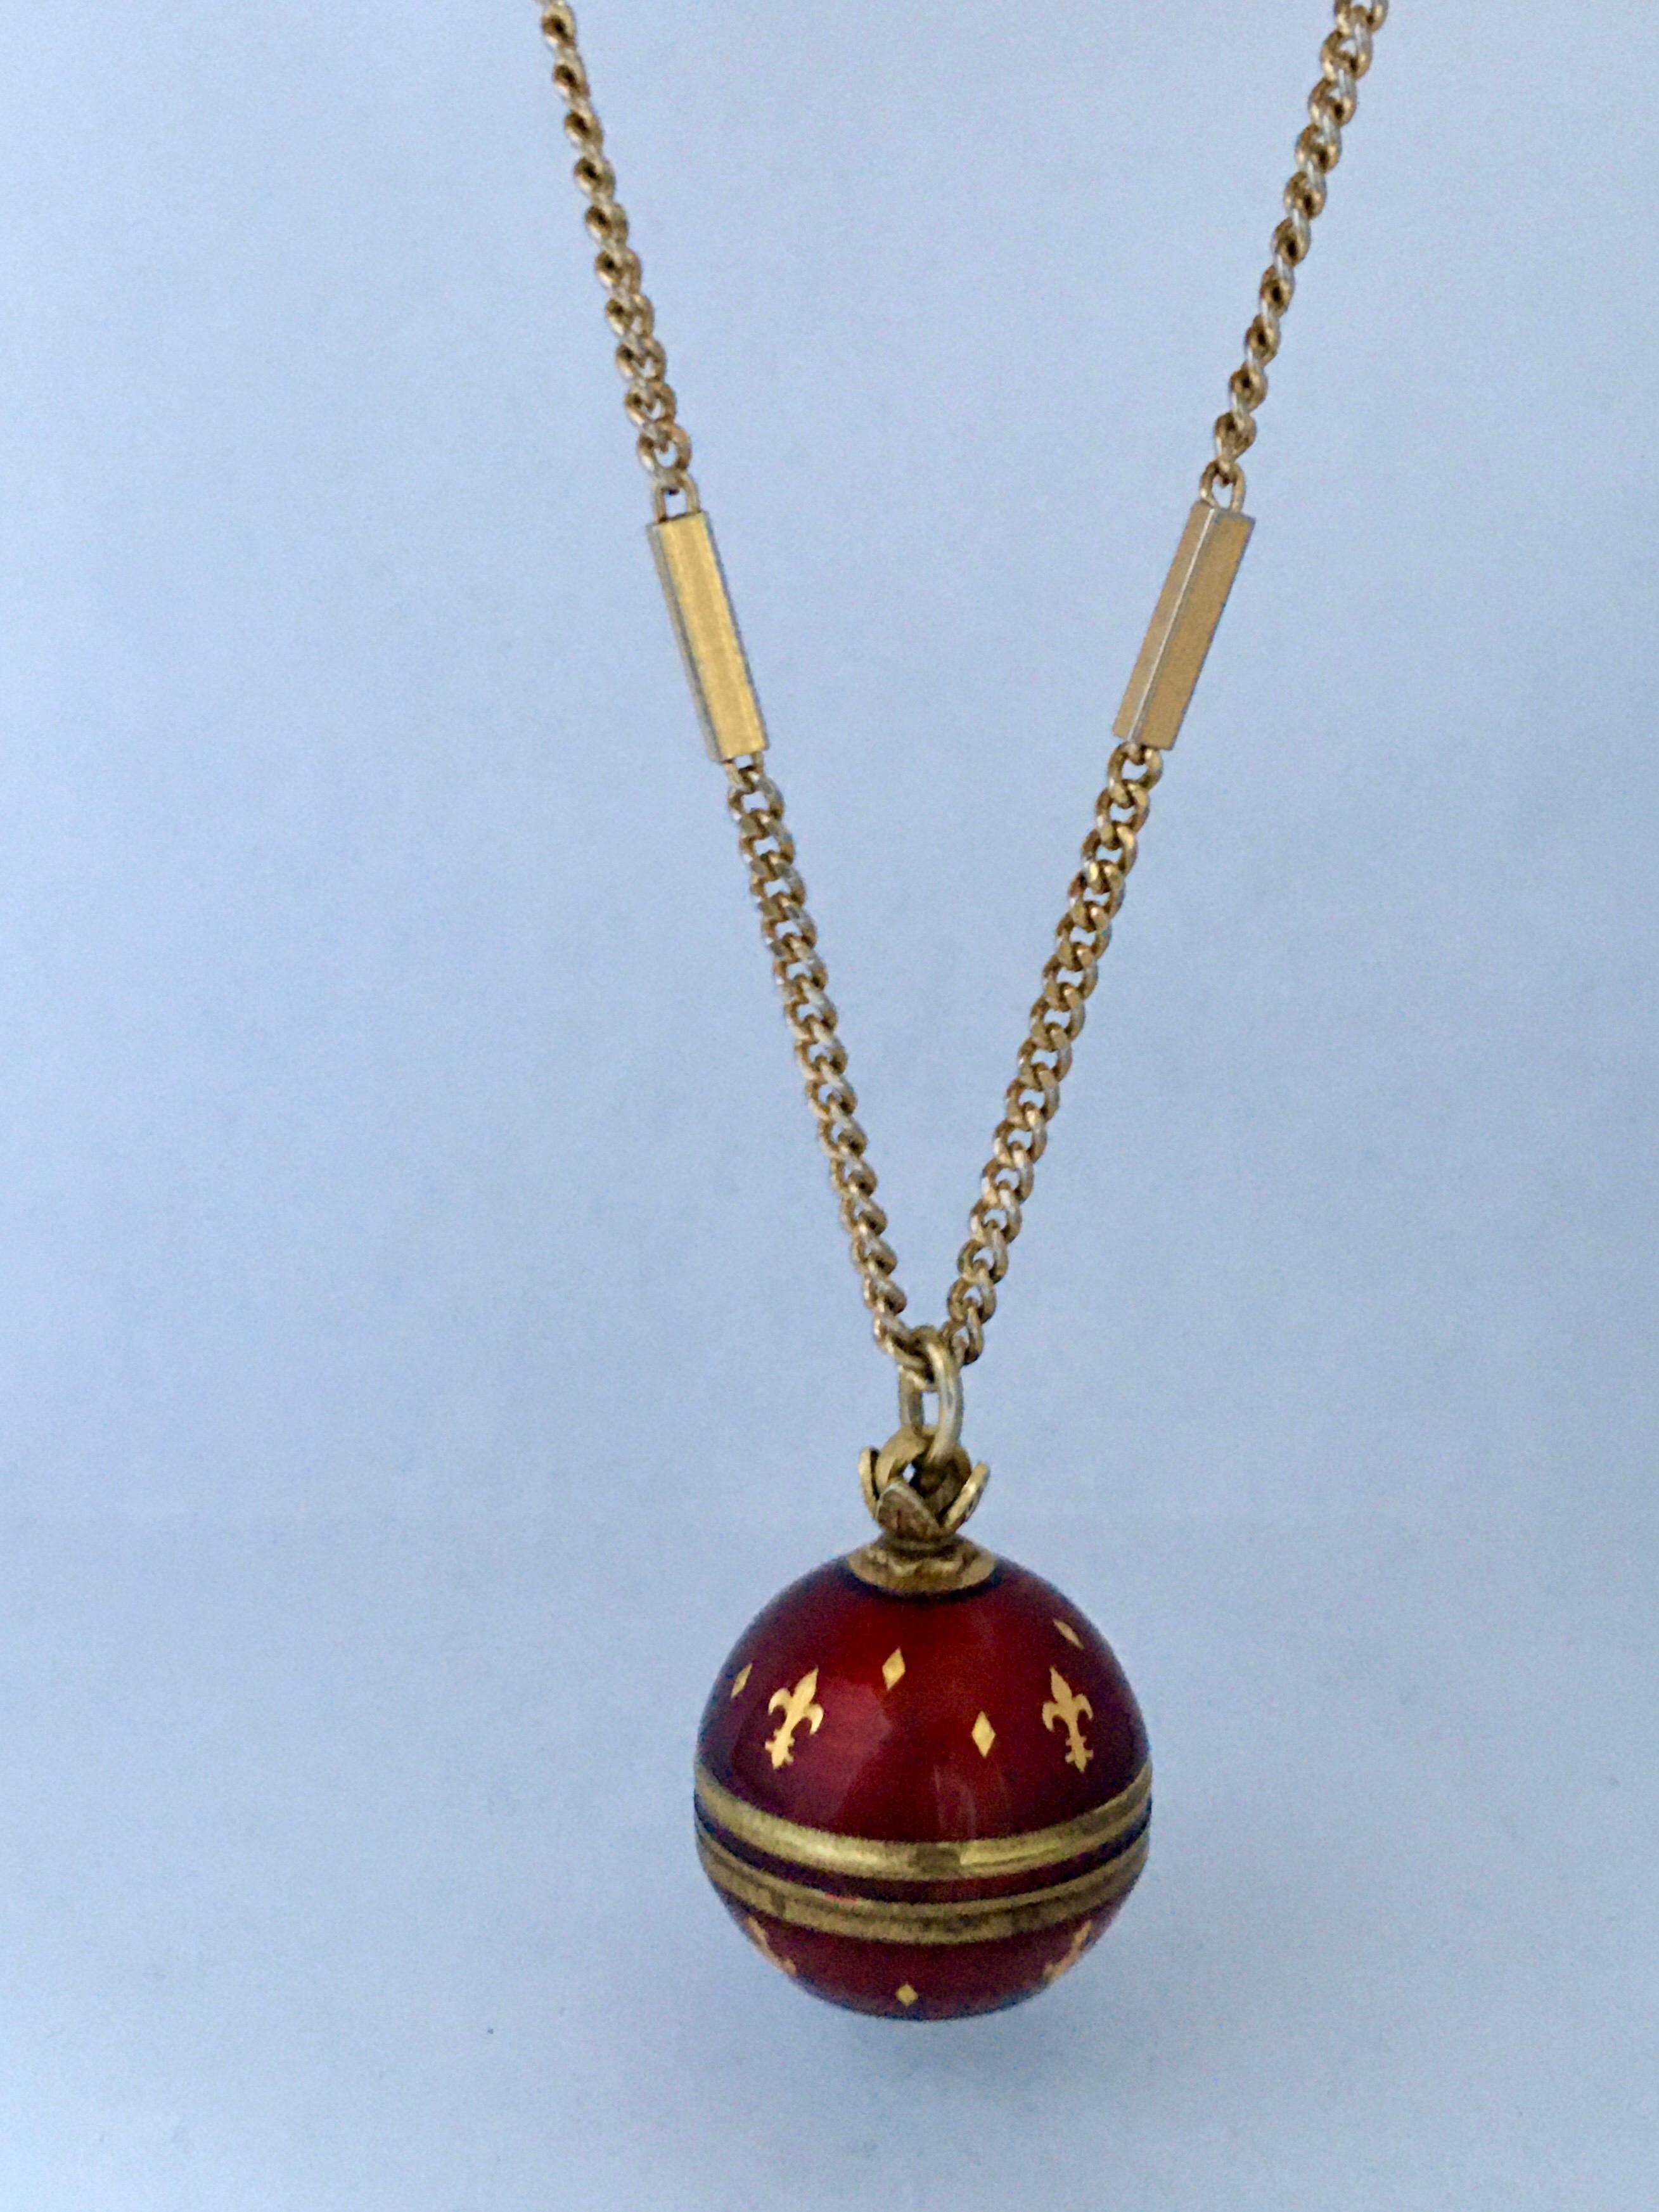 This beautiful pre-owned vintage red enamel with gold fleur de lis inlaid hand winding pendant ball watch is in good working condition and it is ticking well. A slight scratches and tarnish on its gold plated bessel. It’s come with a vintage 32